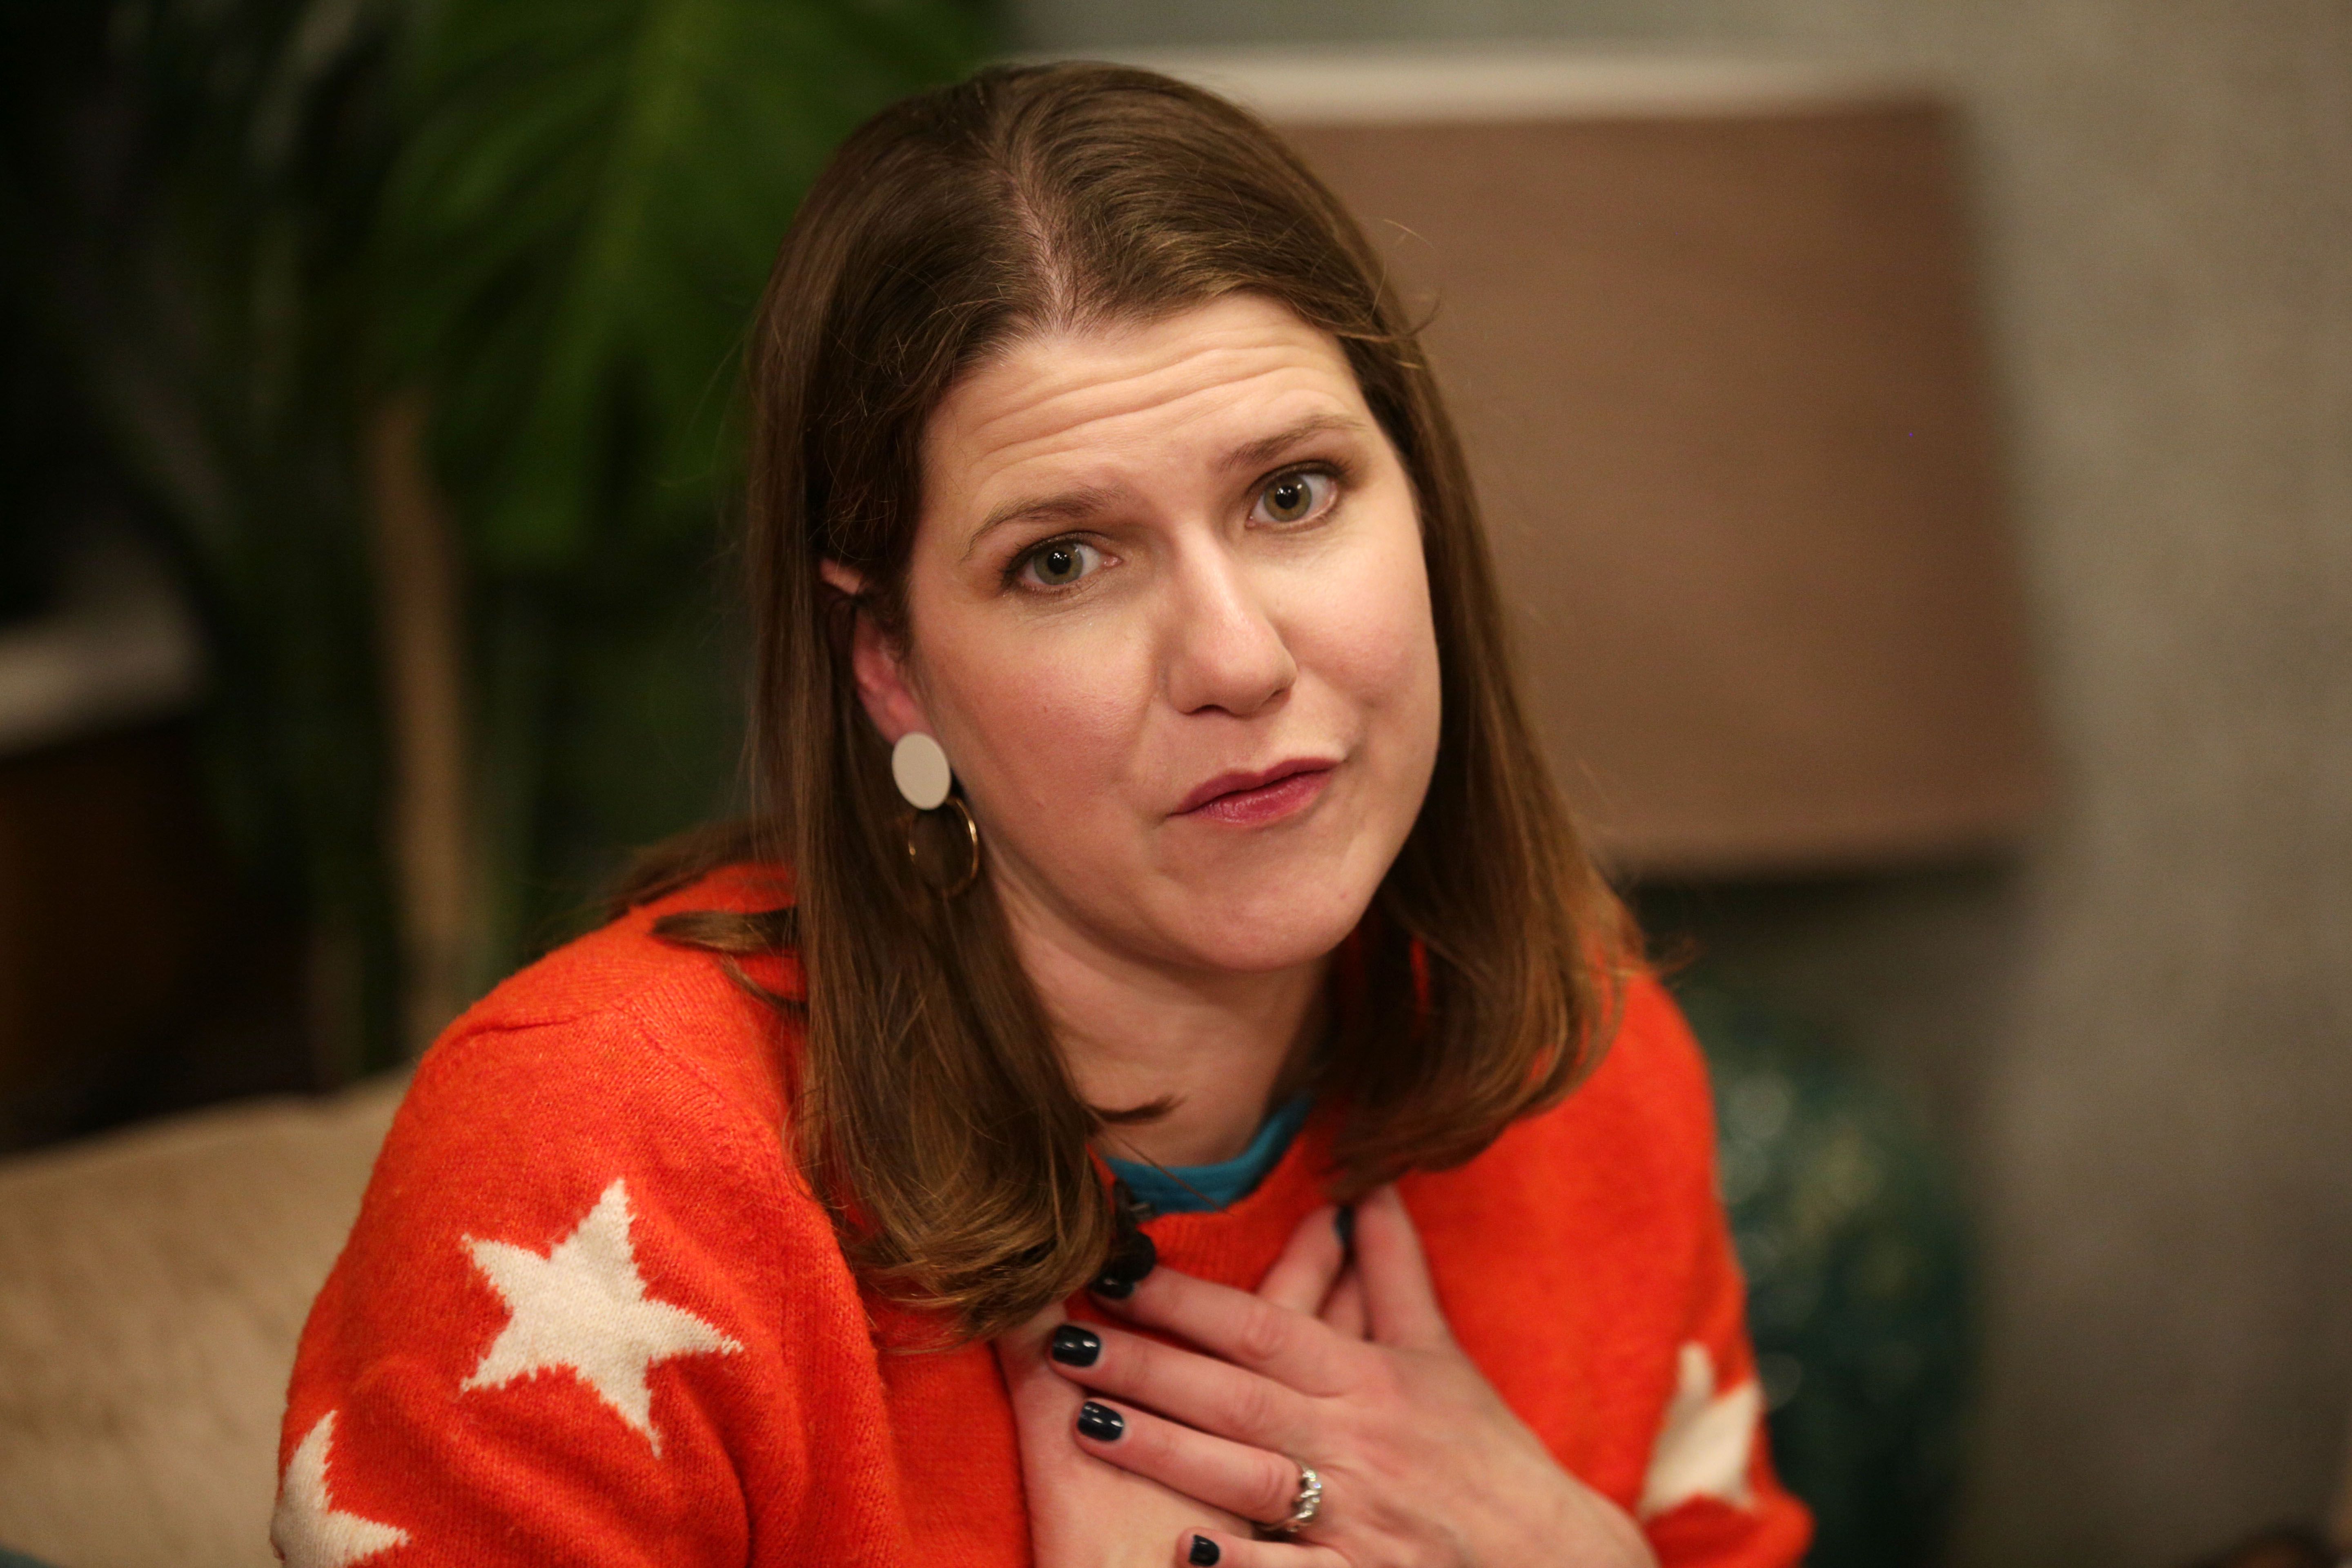 Jo Swinson on trans women, 'bum boys' and whether gay sex is a sin